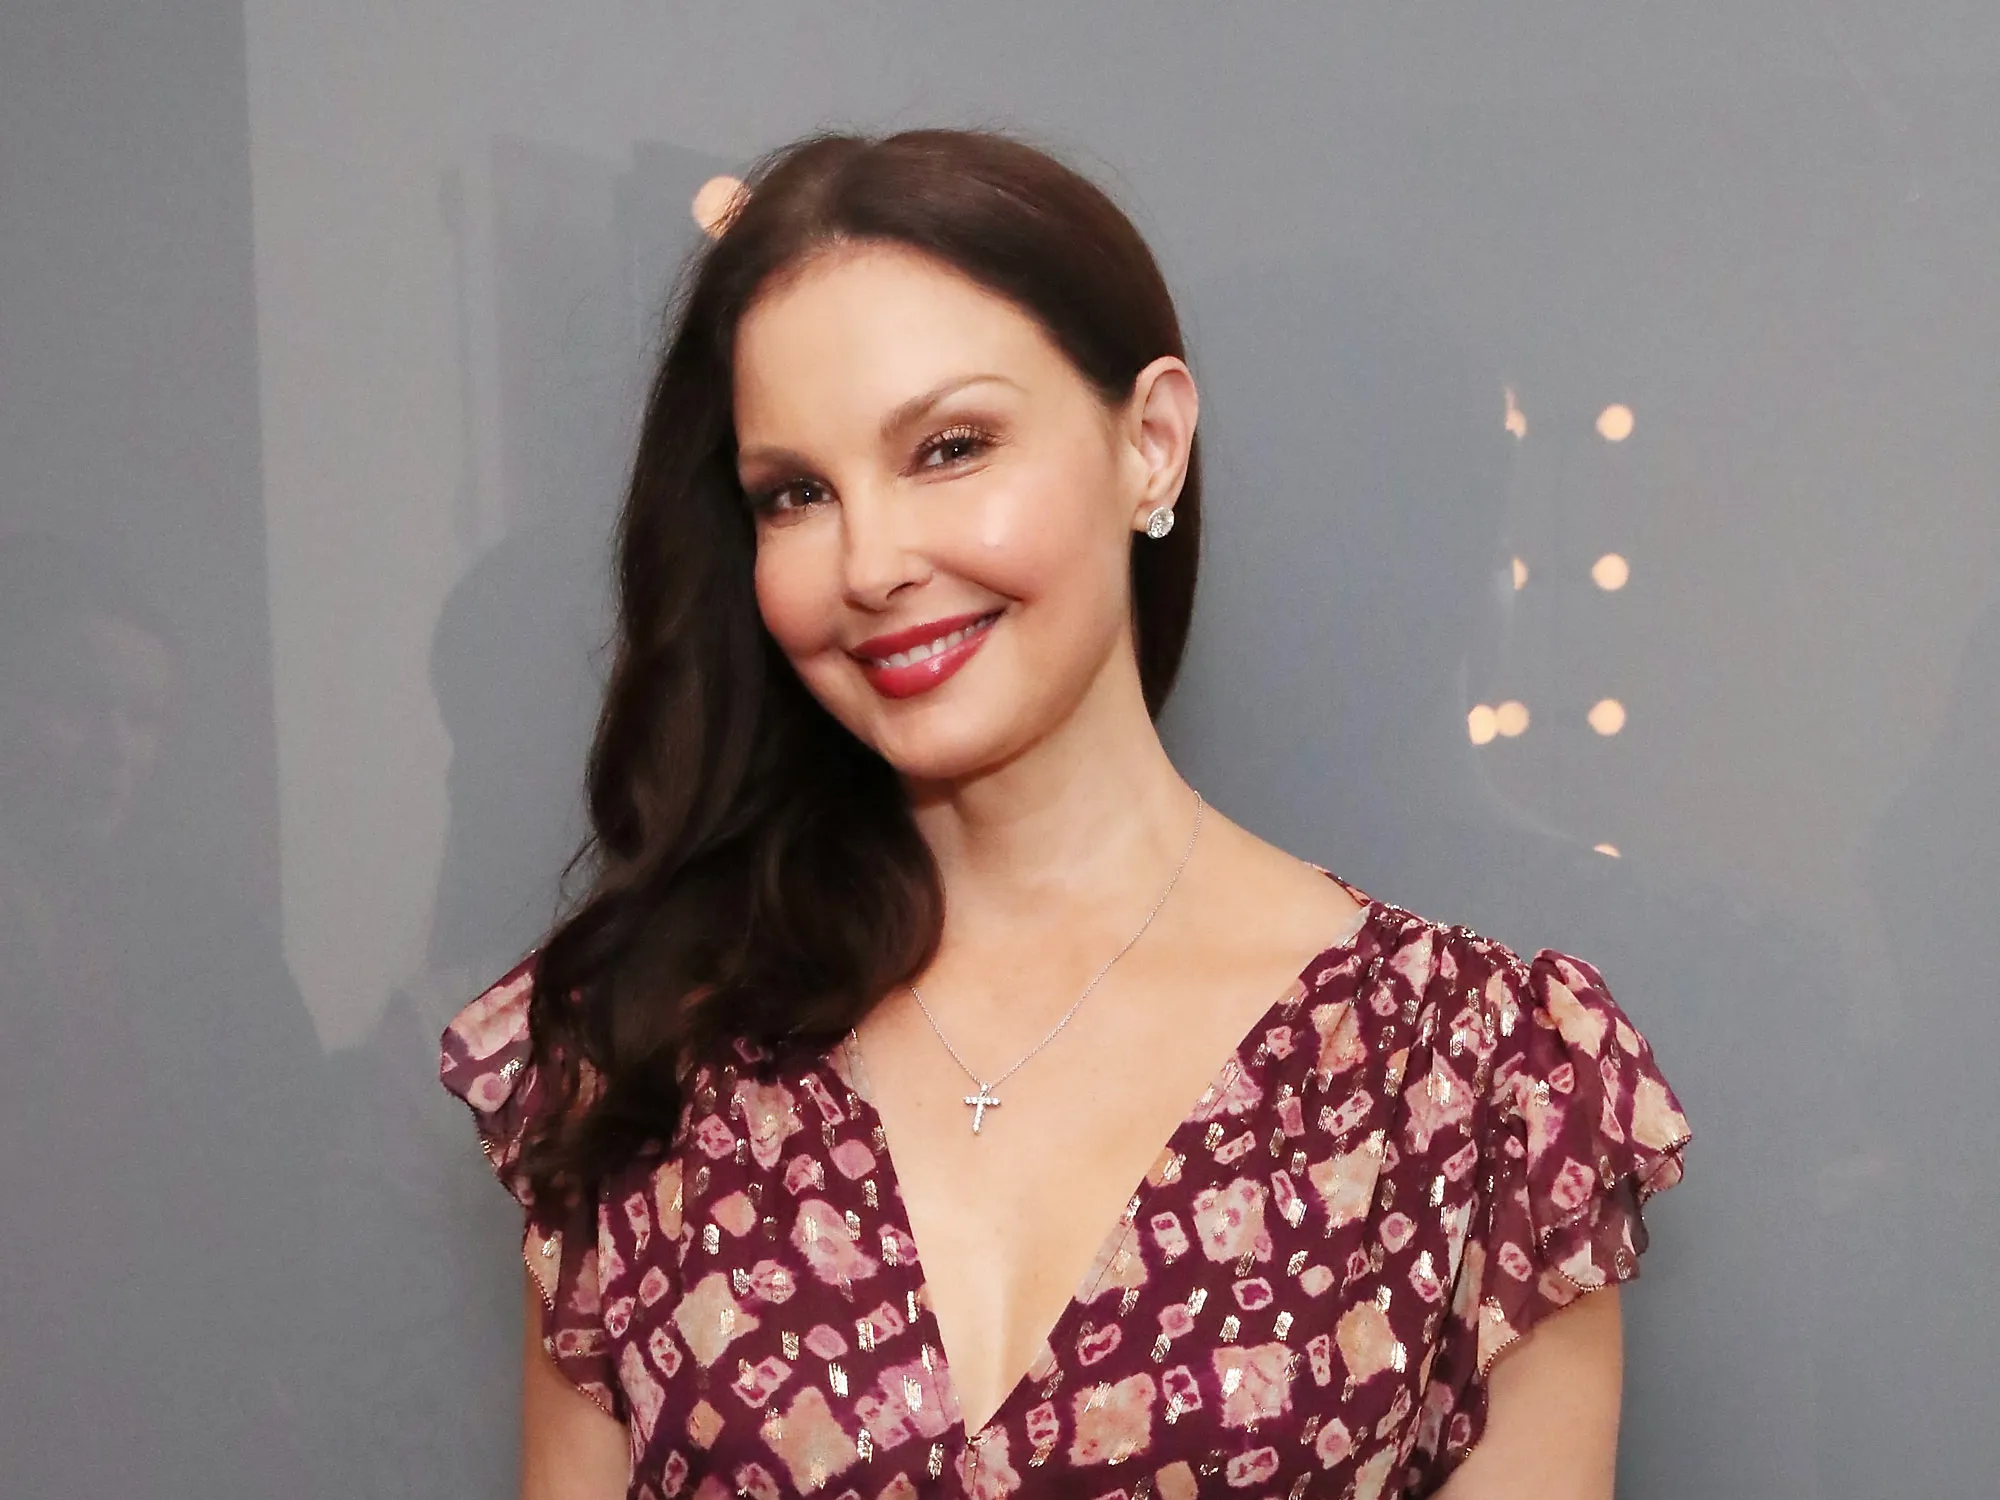 Ashley Judd Face Accident: Know Everything